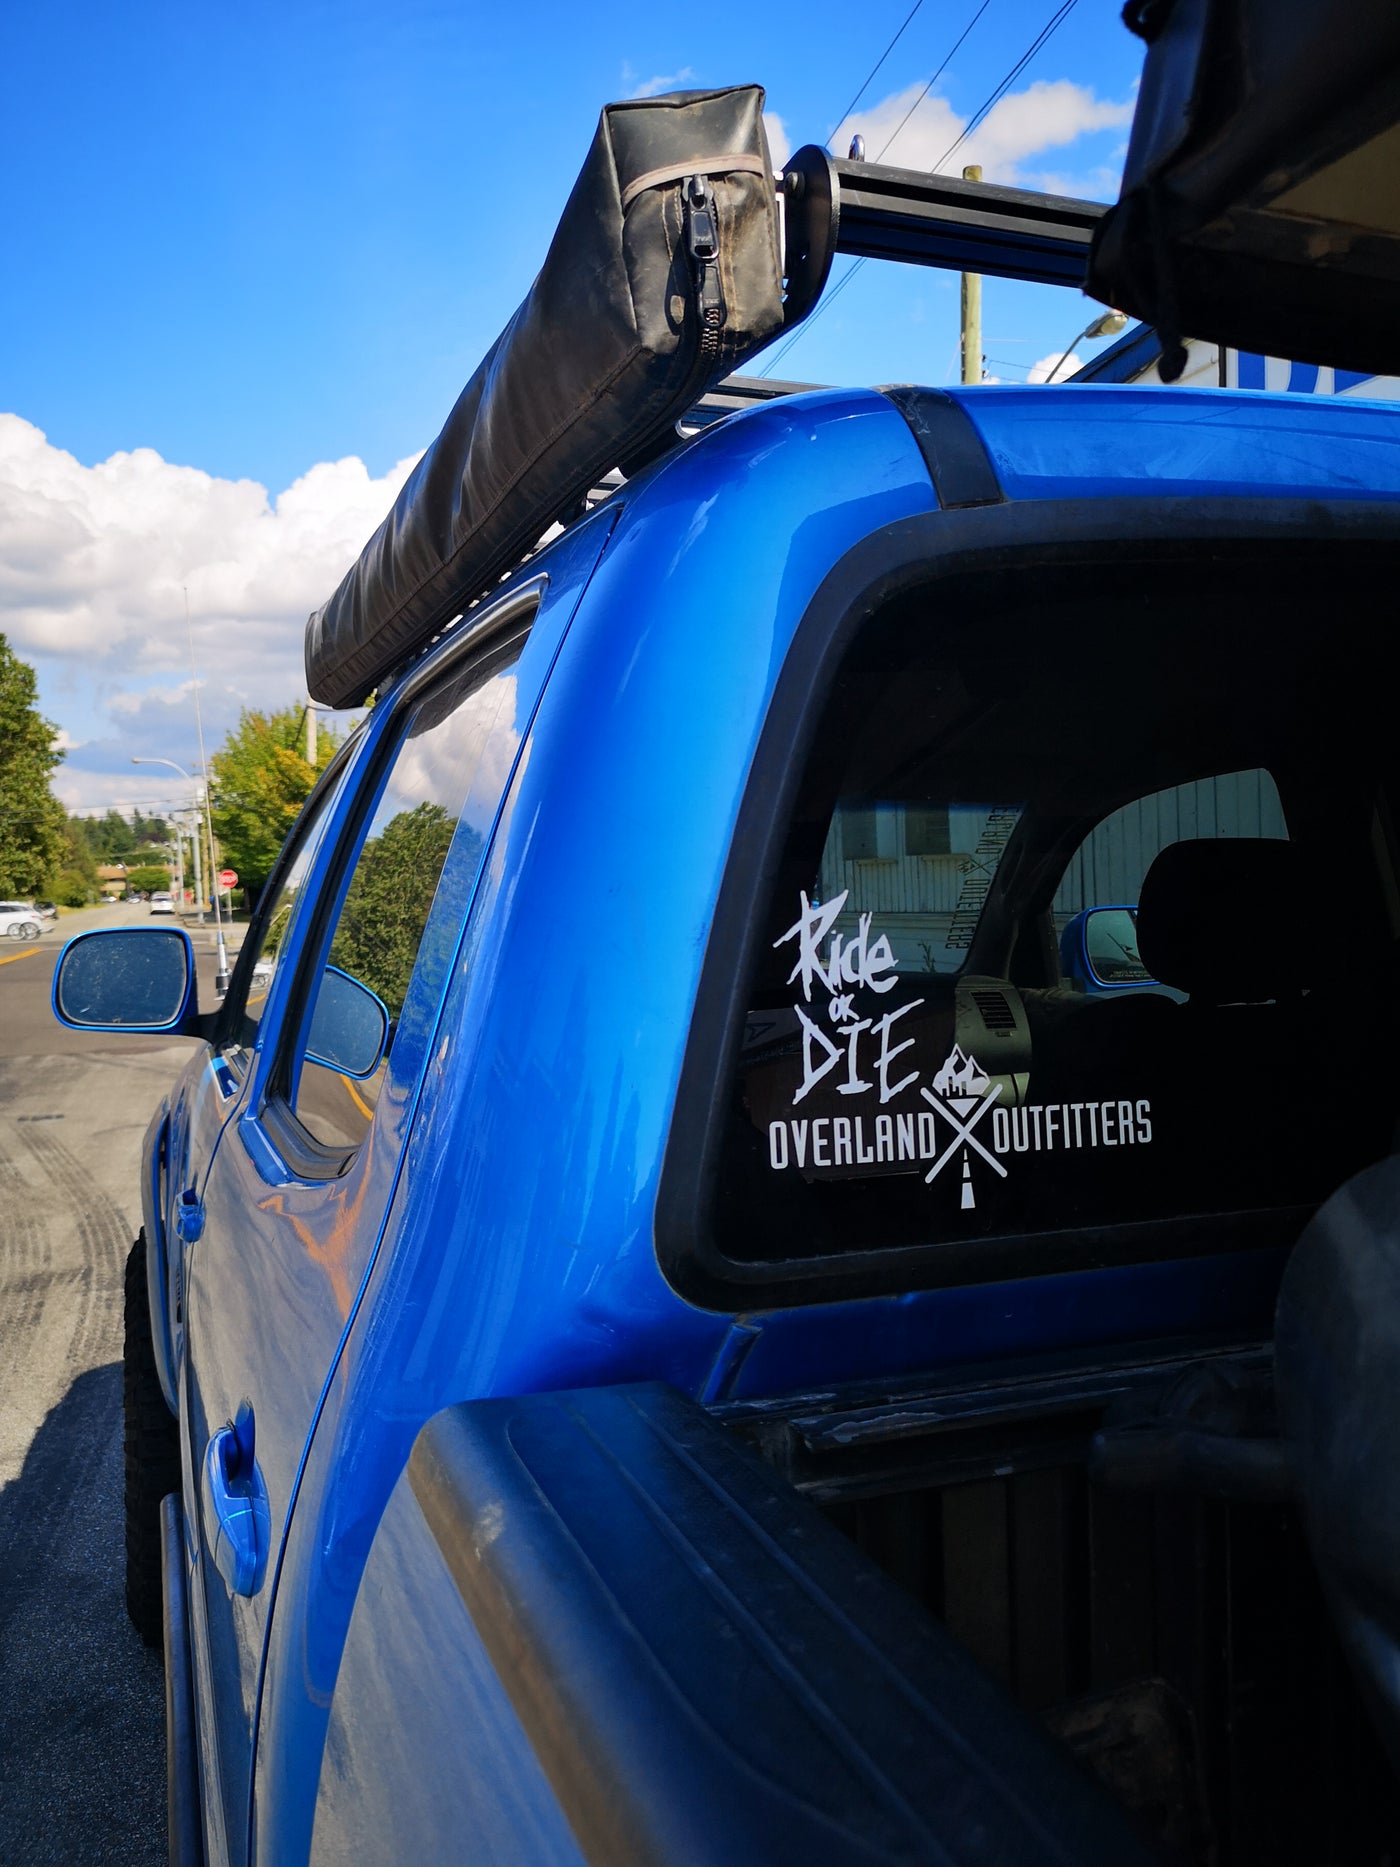 Overland Outfitters Vinyl Decal